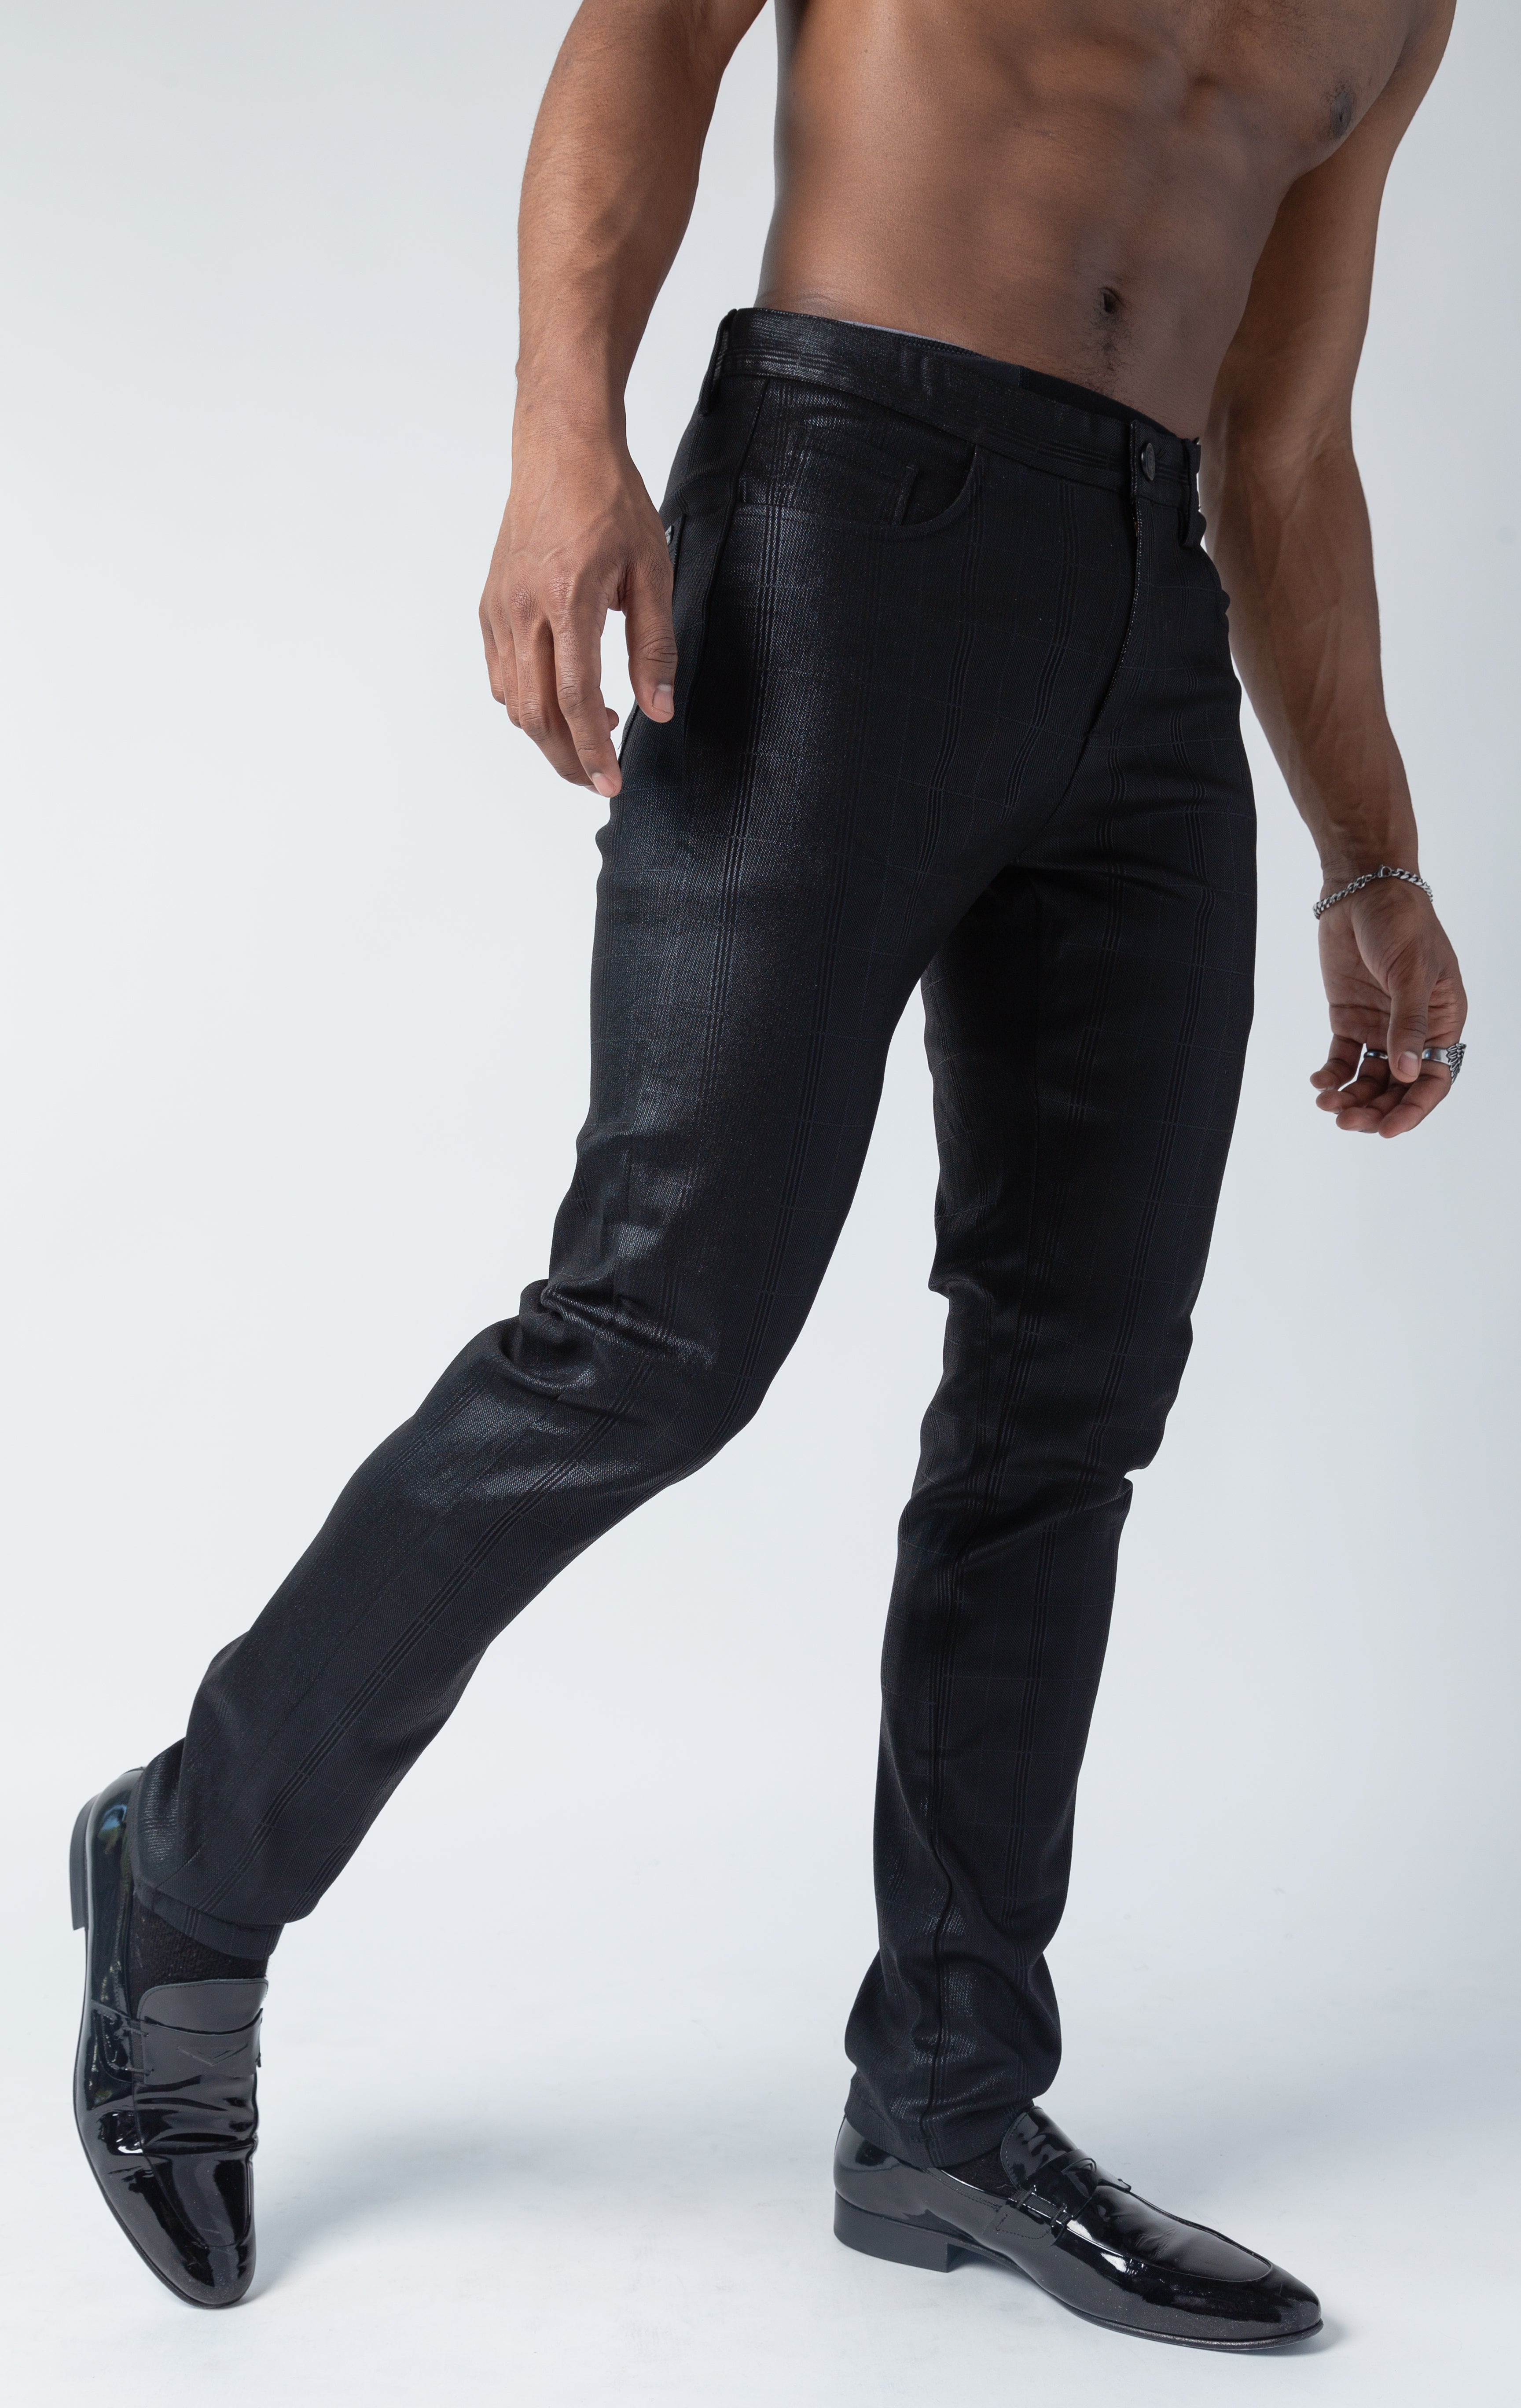 Black glossy sheen, stretchy and leather-like pants